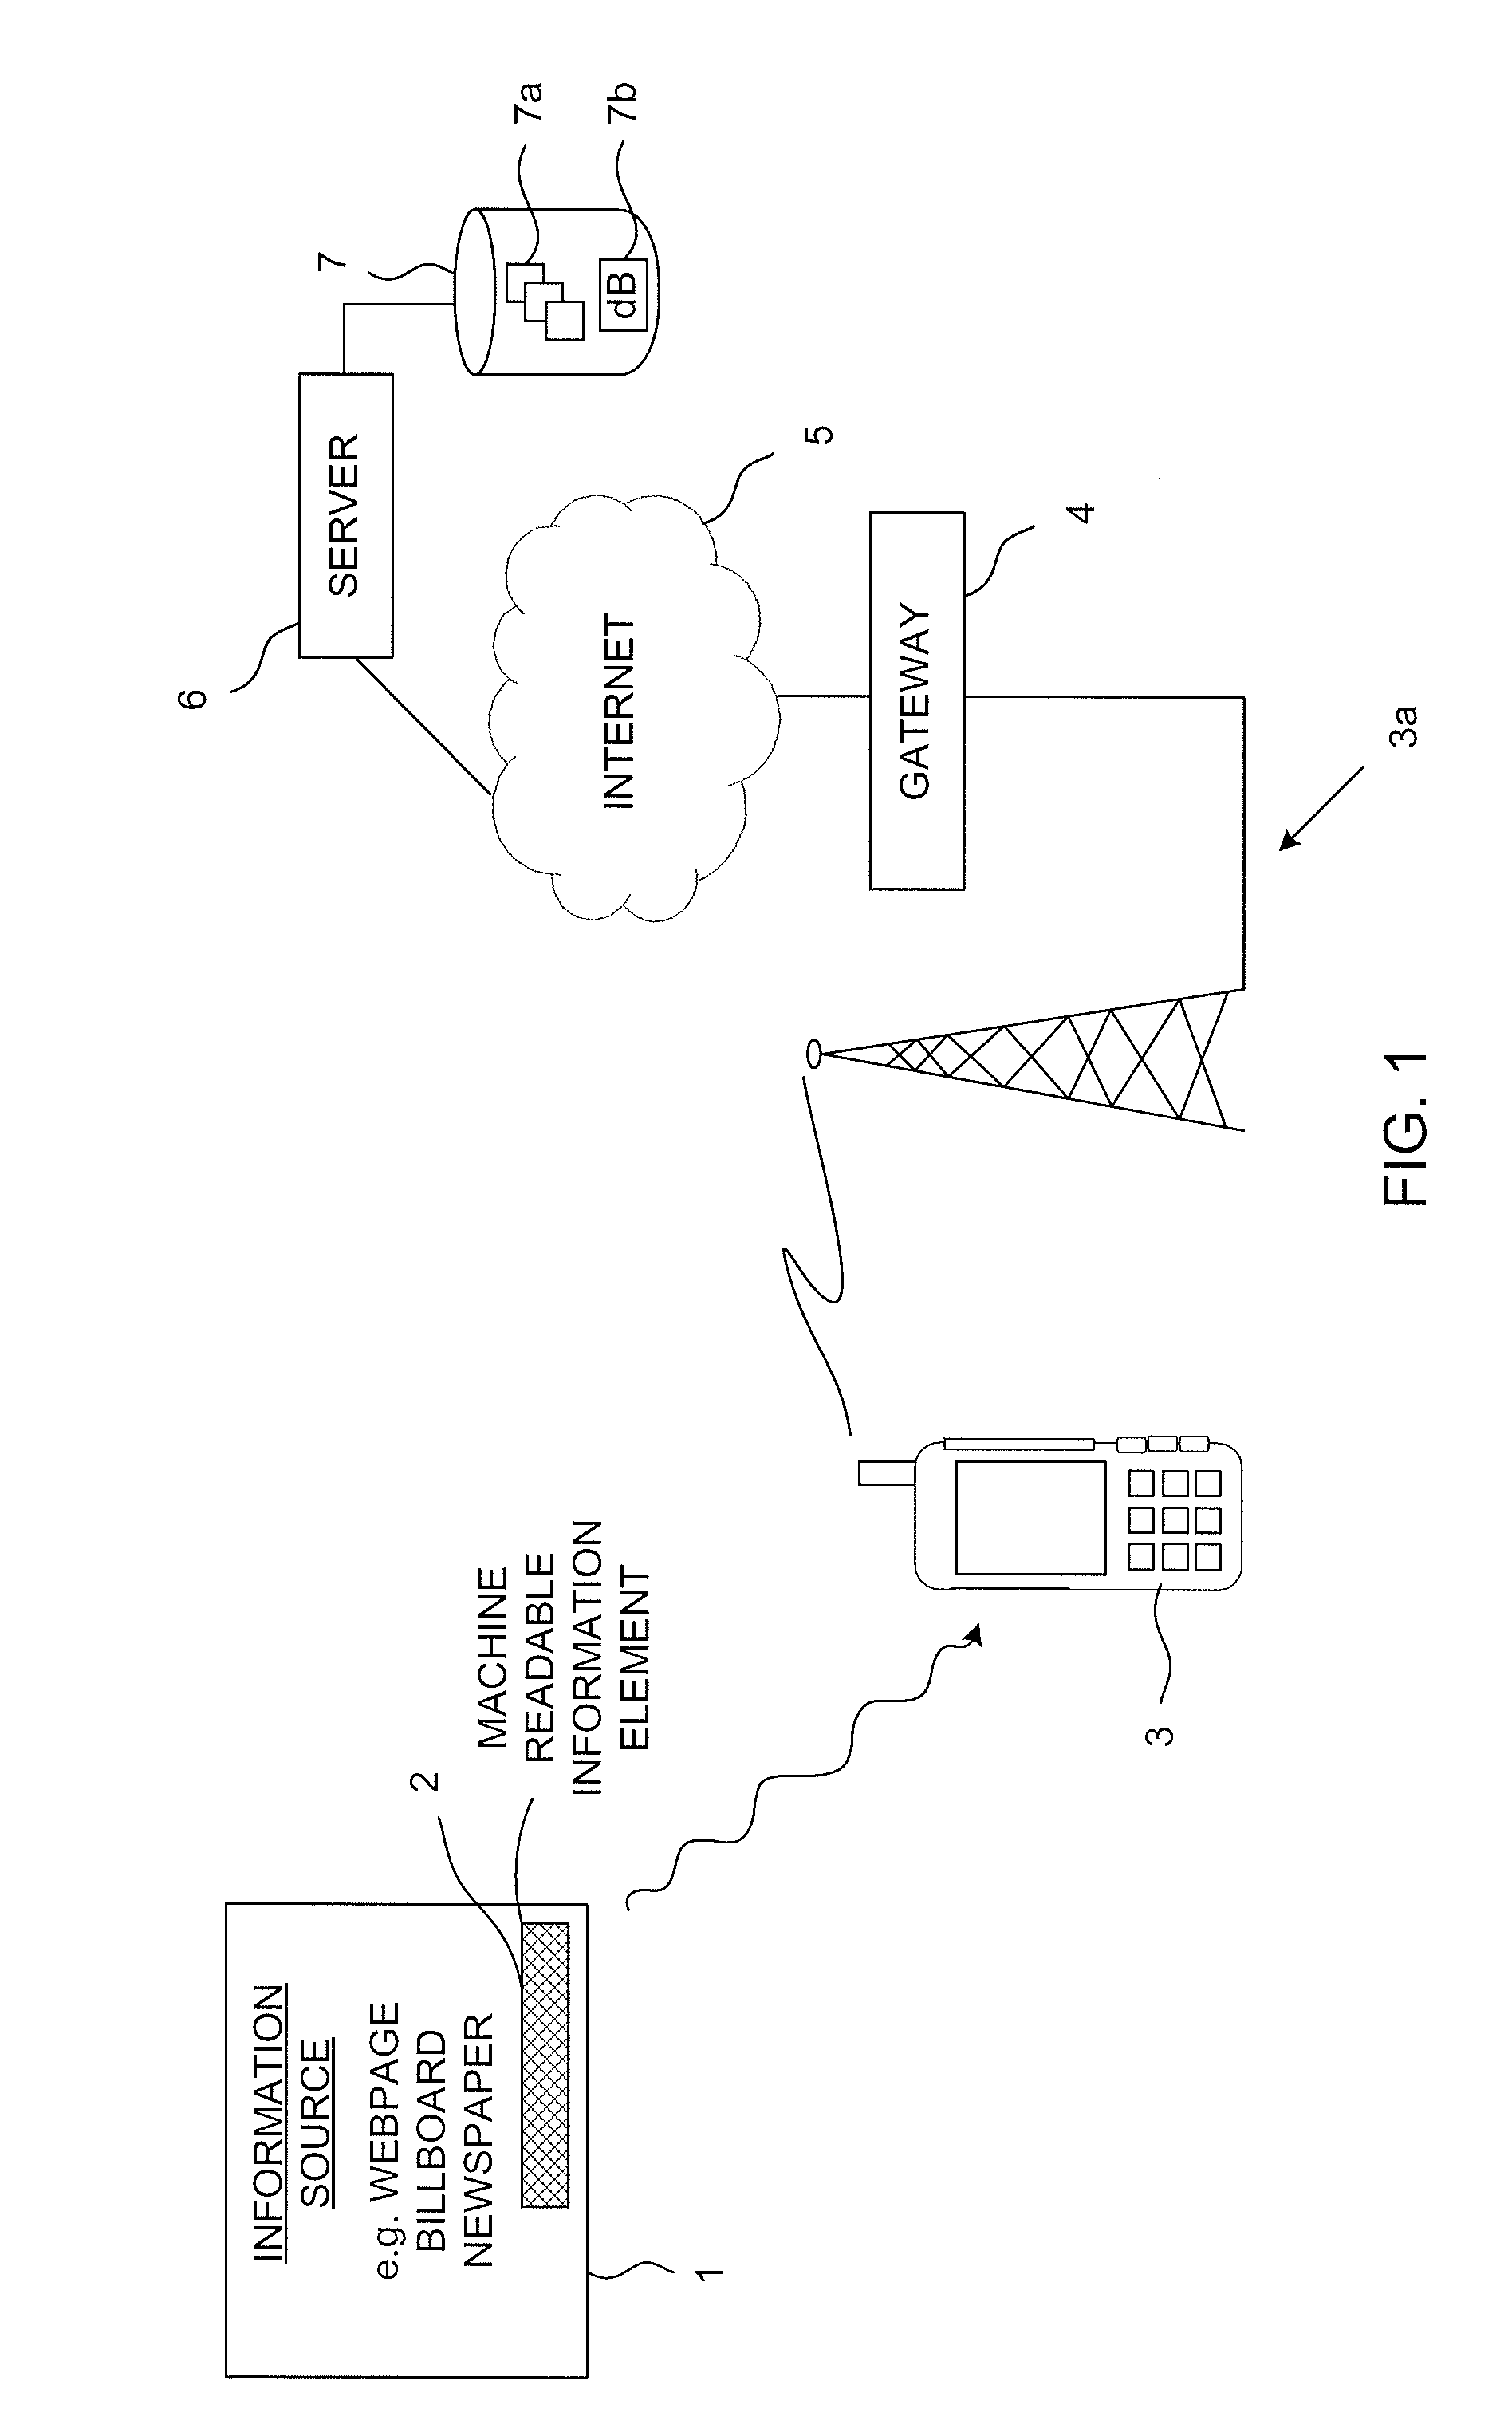 Method of Advertising, An Advertisement, And A Method of Responding To An Advertisement Using a Mobile Device